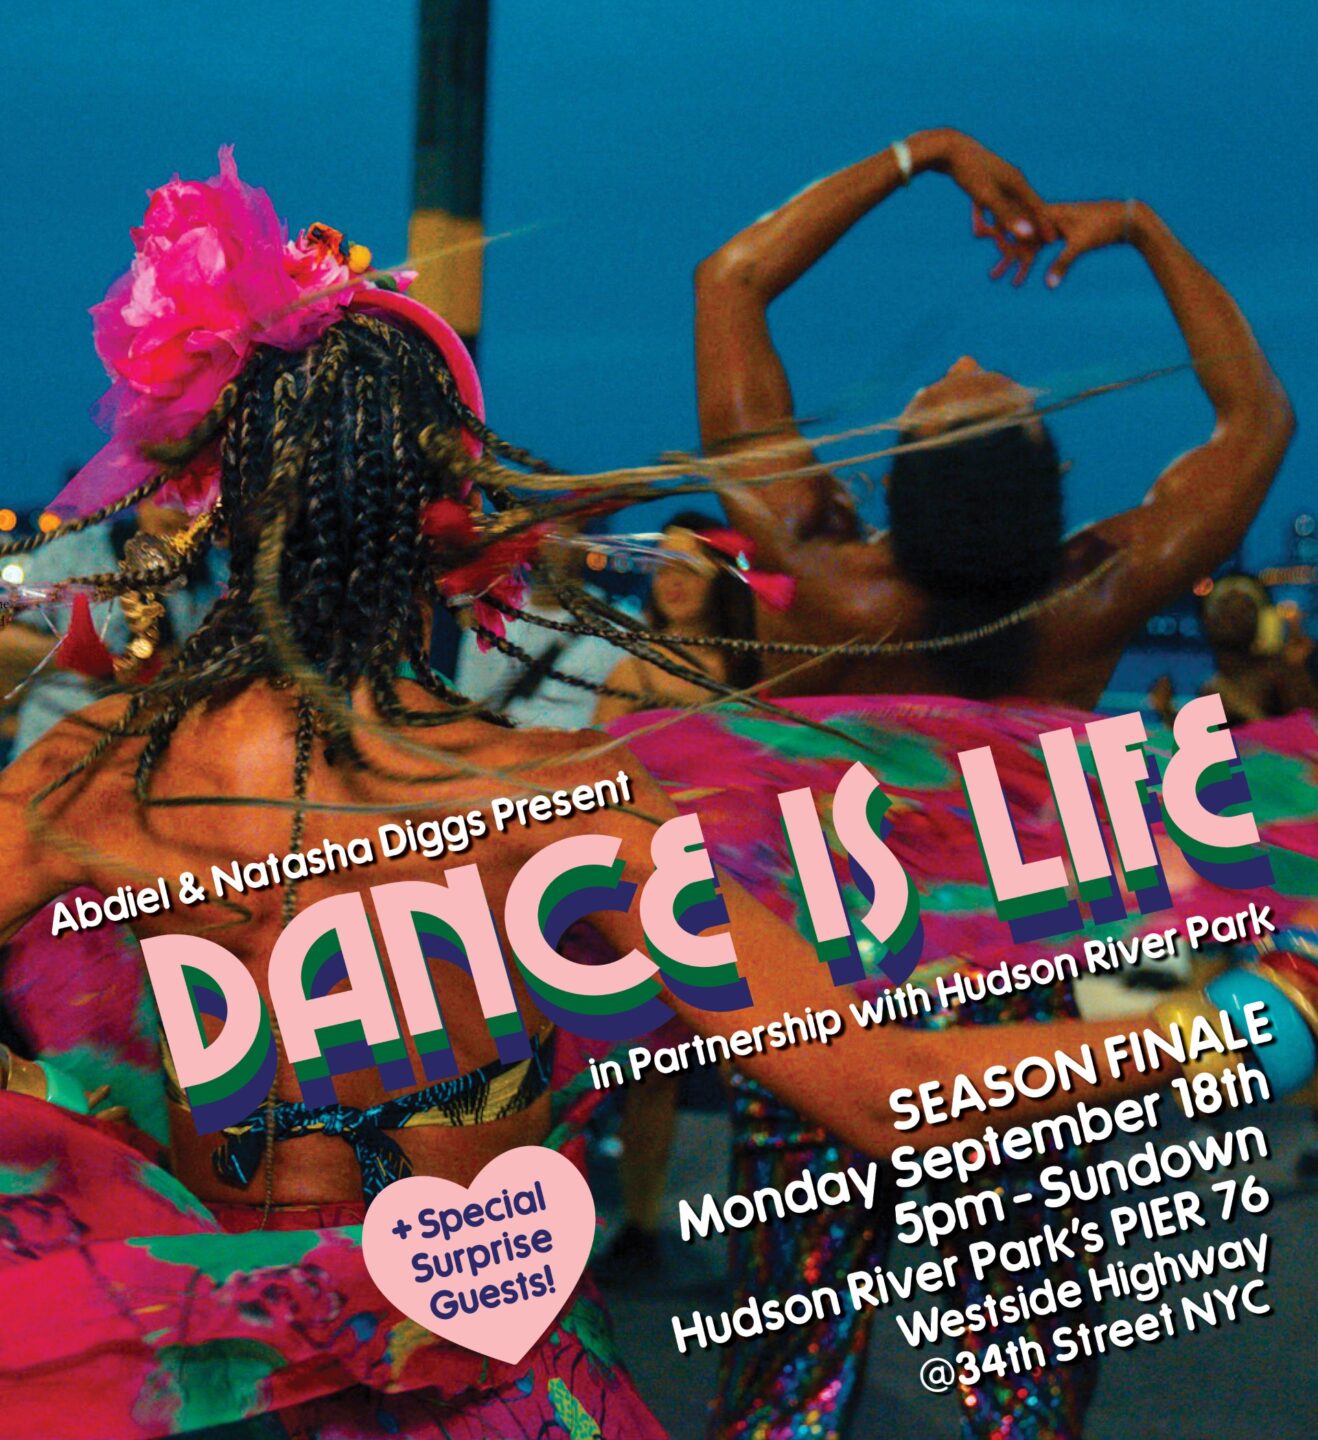 People dancing with text overlaid: Abdiel & Natasha Diggs Present Dance is Life in Partnership with Hudson River Park Season Finale Monday, September 18 5:00 PM – Sundown Hudson River Park's Pier 76 – West Side Highway @ 34 Street